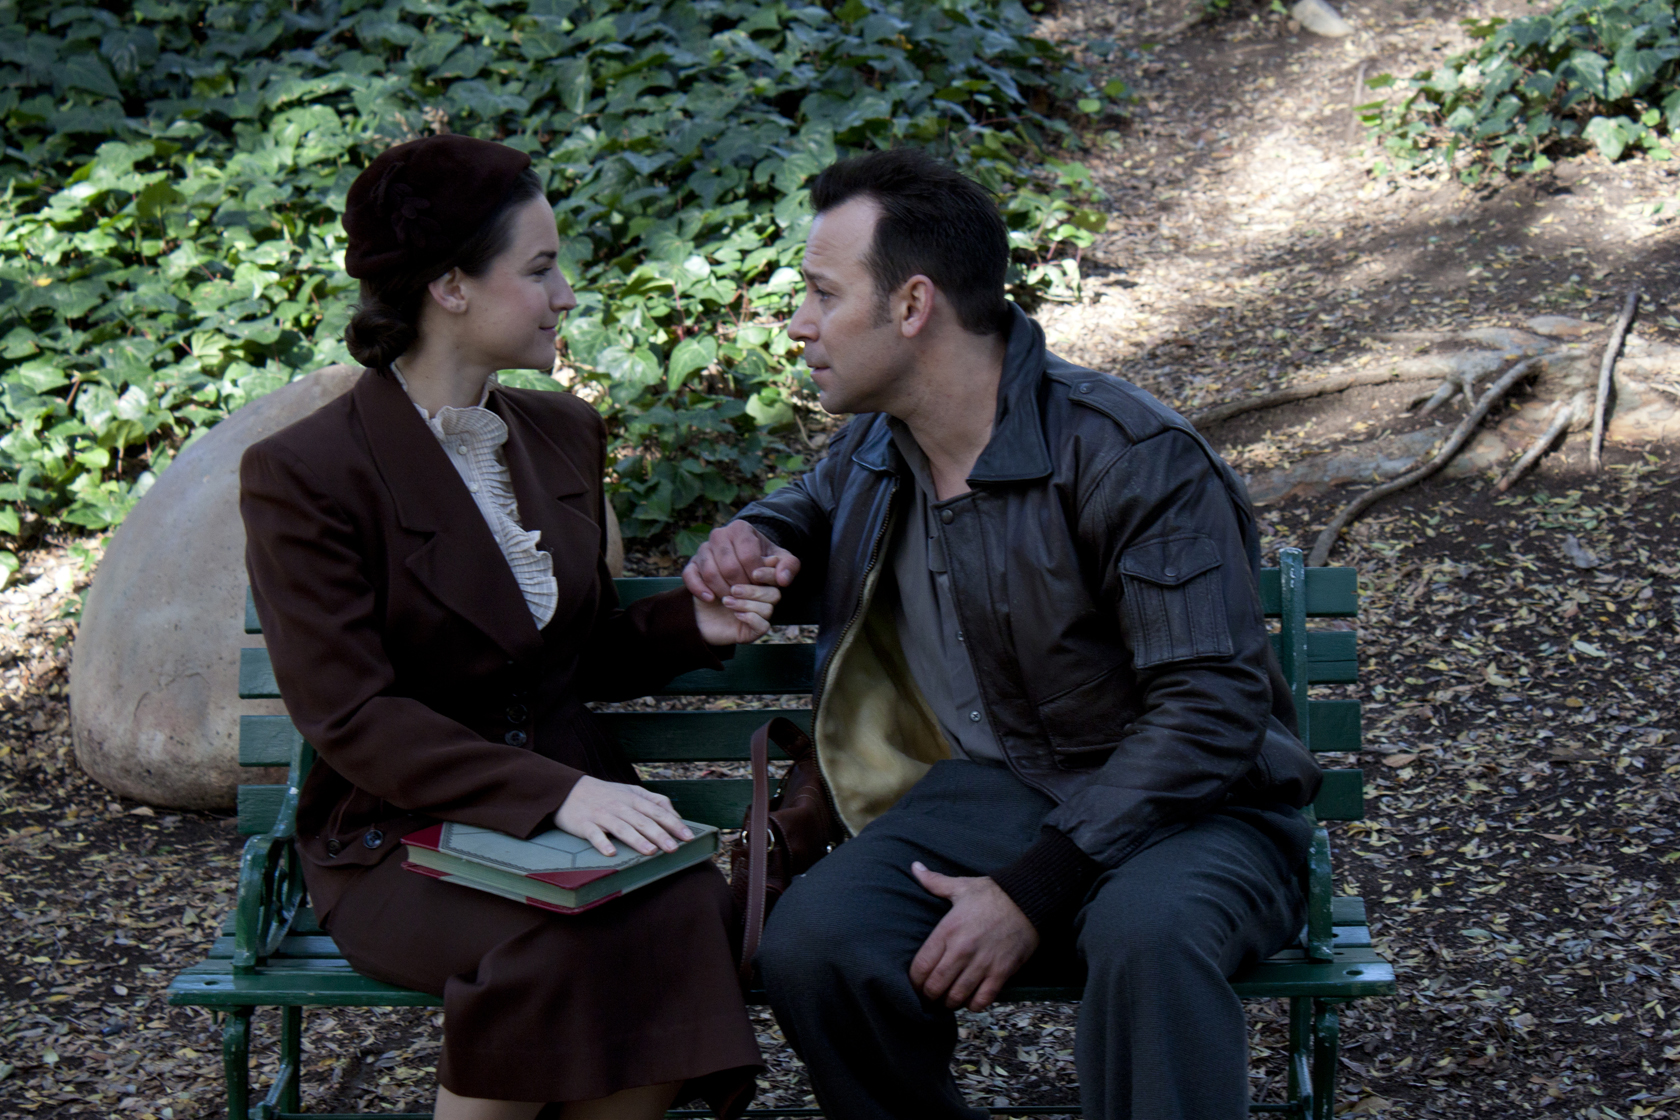 On the set of Speakeasy, Patrick Lazzara as Nate and Jerin Forgie as Kelly